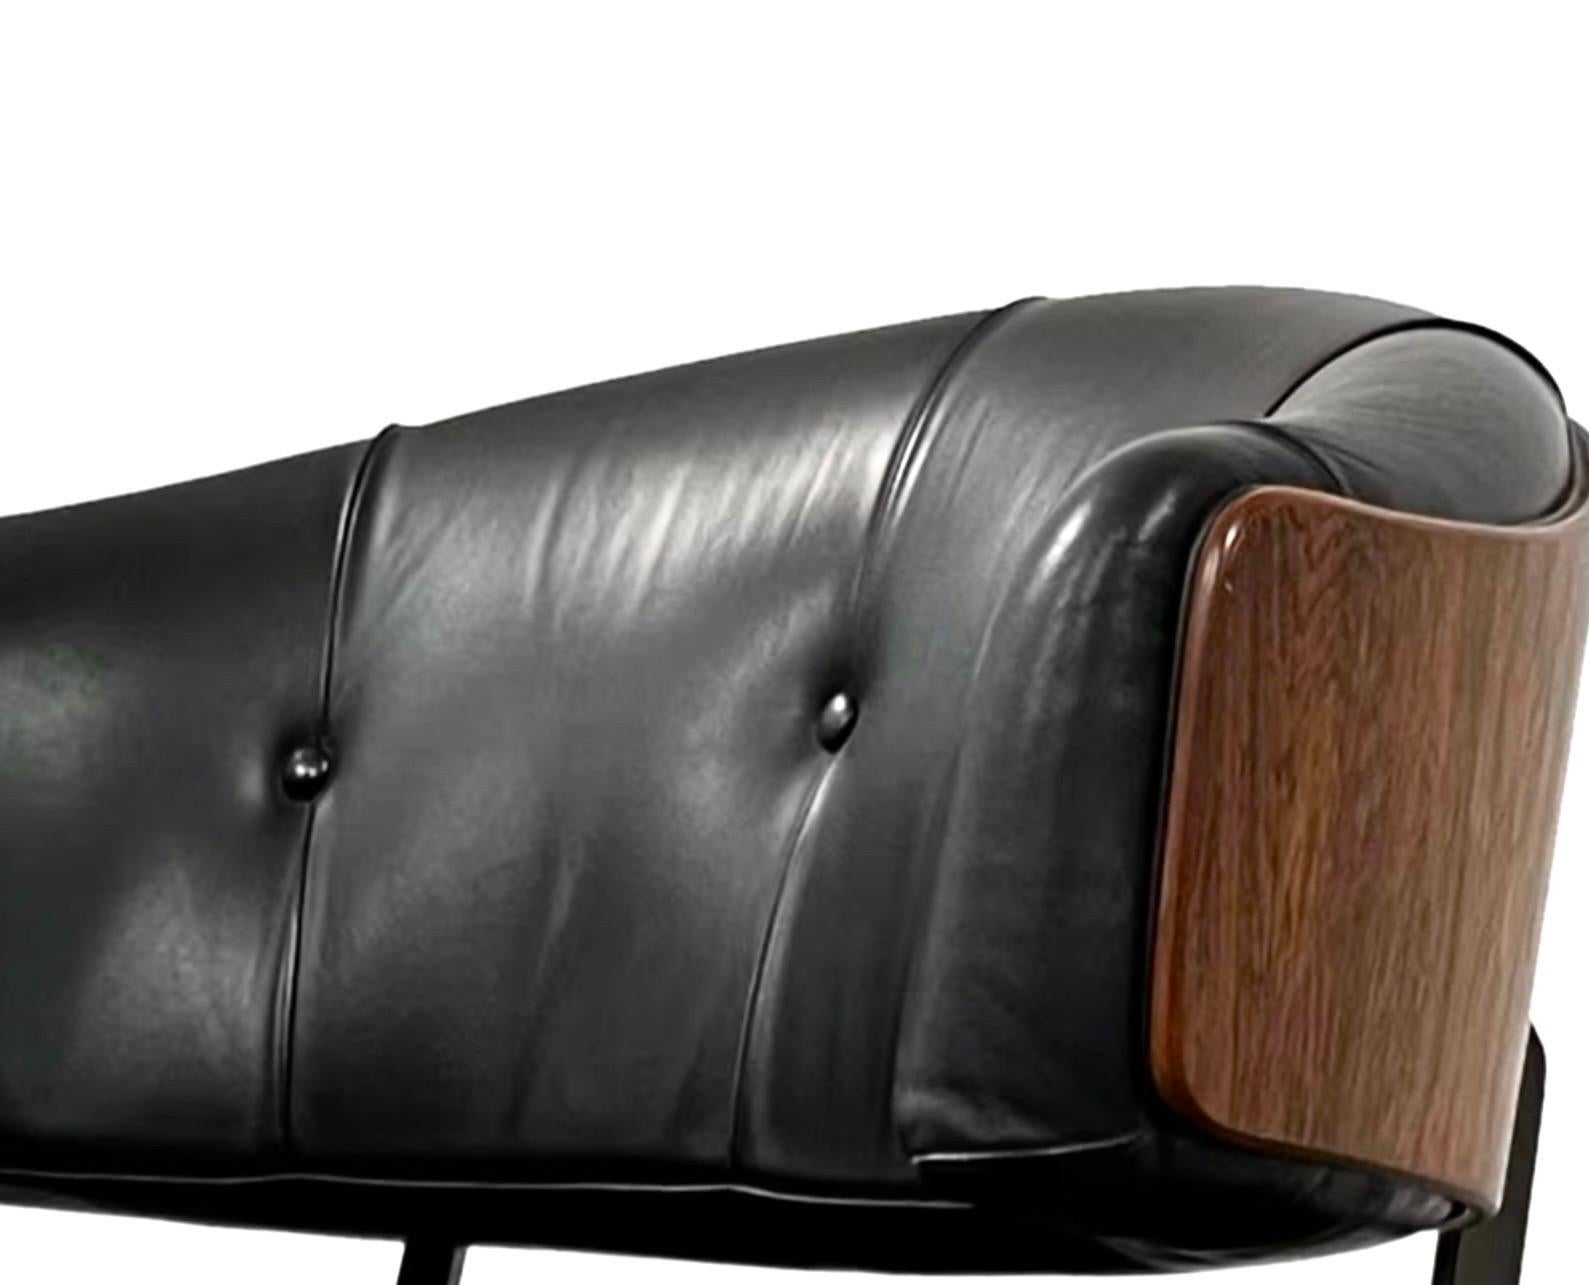 Gieger Lounge Chair and Ottoman, Rosewood & Black Leather, Arflex Italia, 1960s

Shell constructed of three elements of rosewood that connect via a fantastic black steel joint.  Shell sits on metal pedestal foot.  Round, organic form and undulations